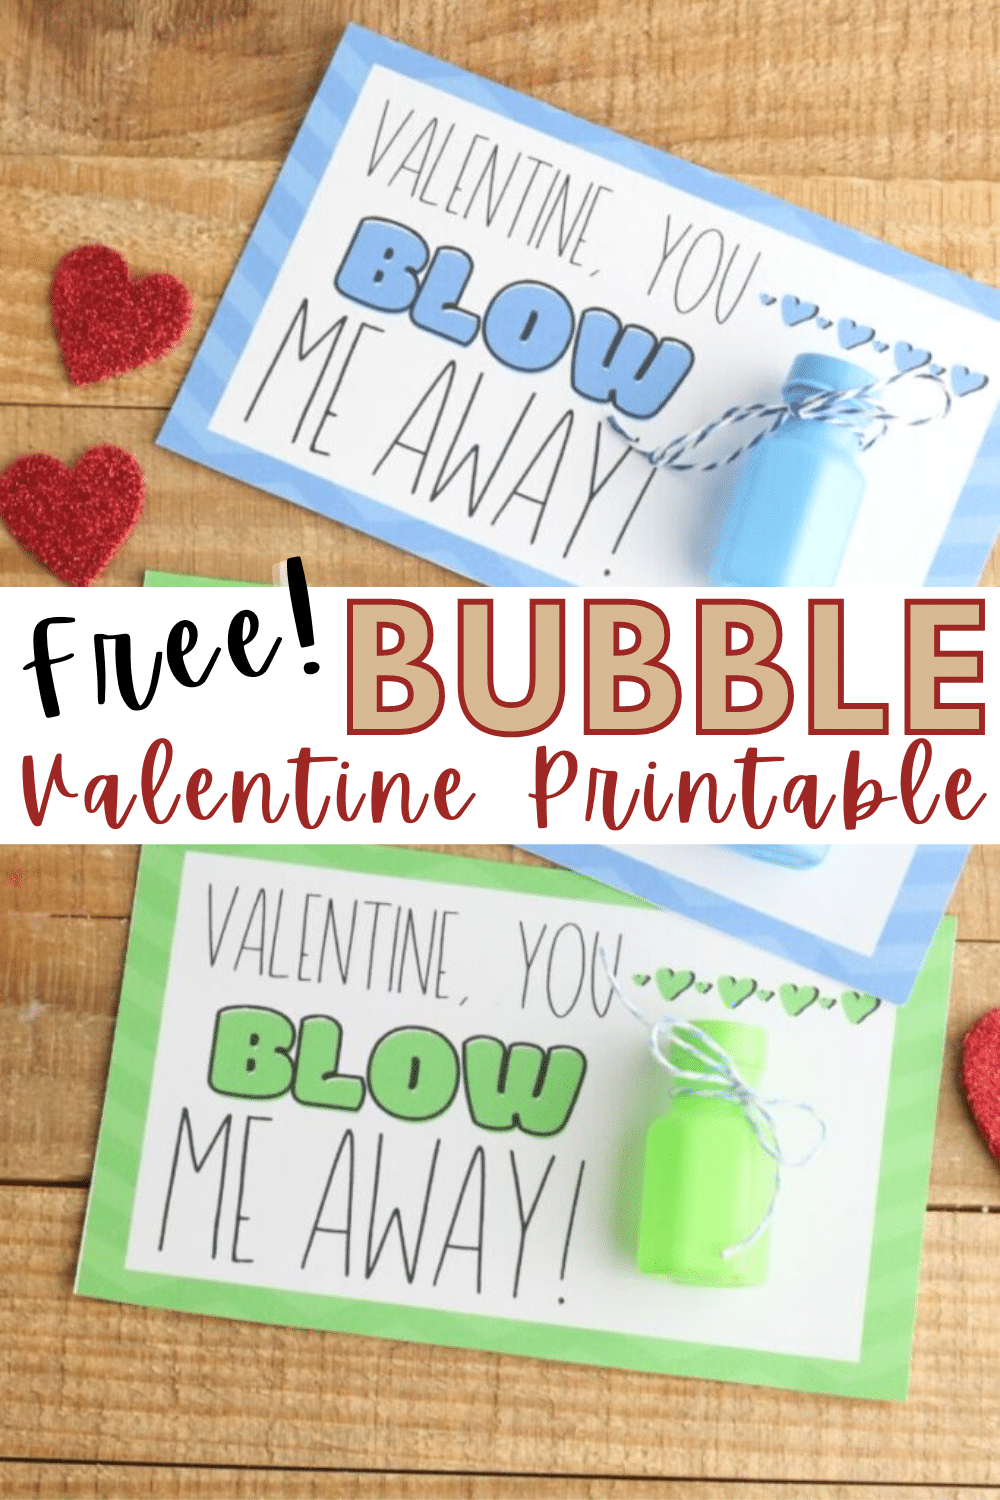 Looking for a super cute non-candy idea for Valentine's Day? This Bubble Valentine (Free Printable) is certain to be hit! #valentinesday #freeprintable #bubbles #noncandy #valentine via @wondermomwannab